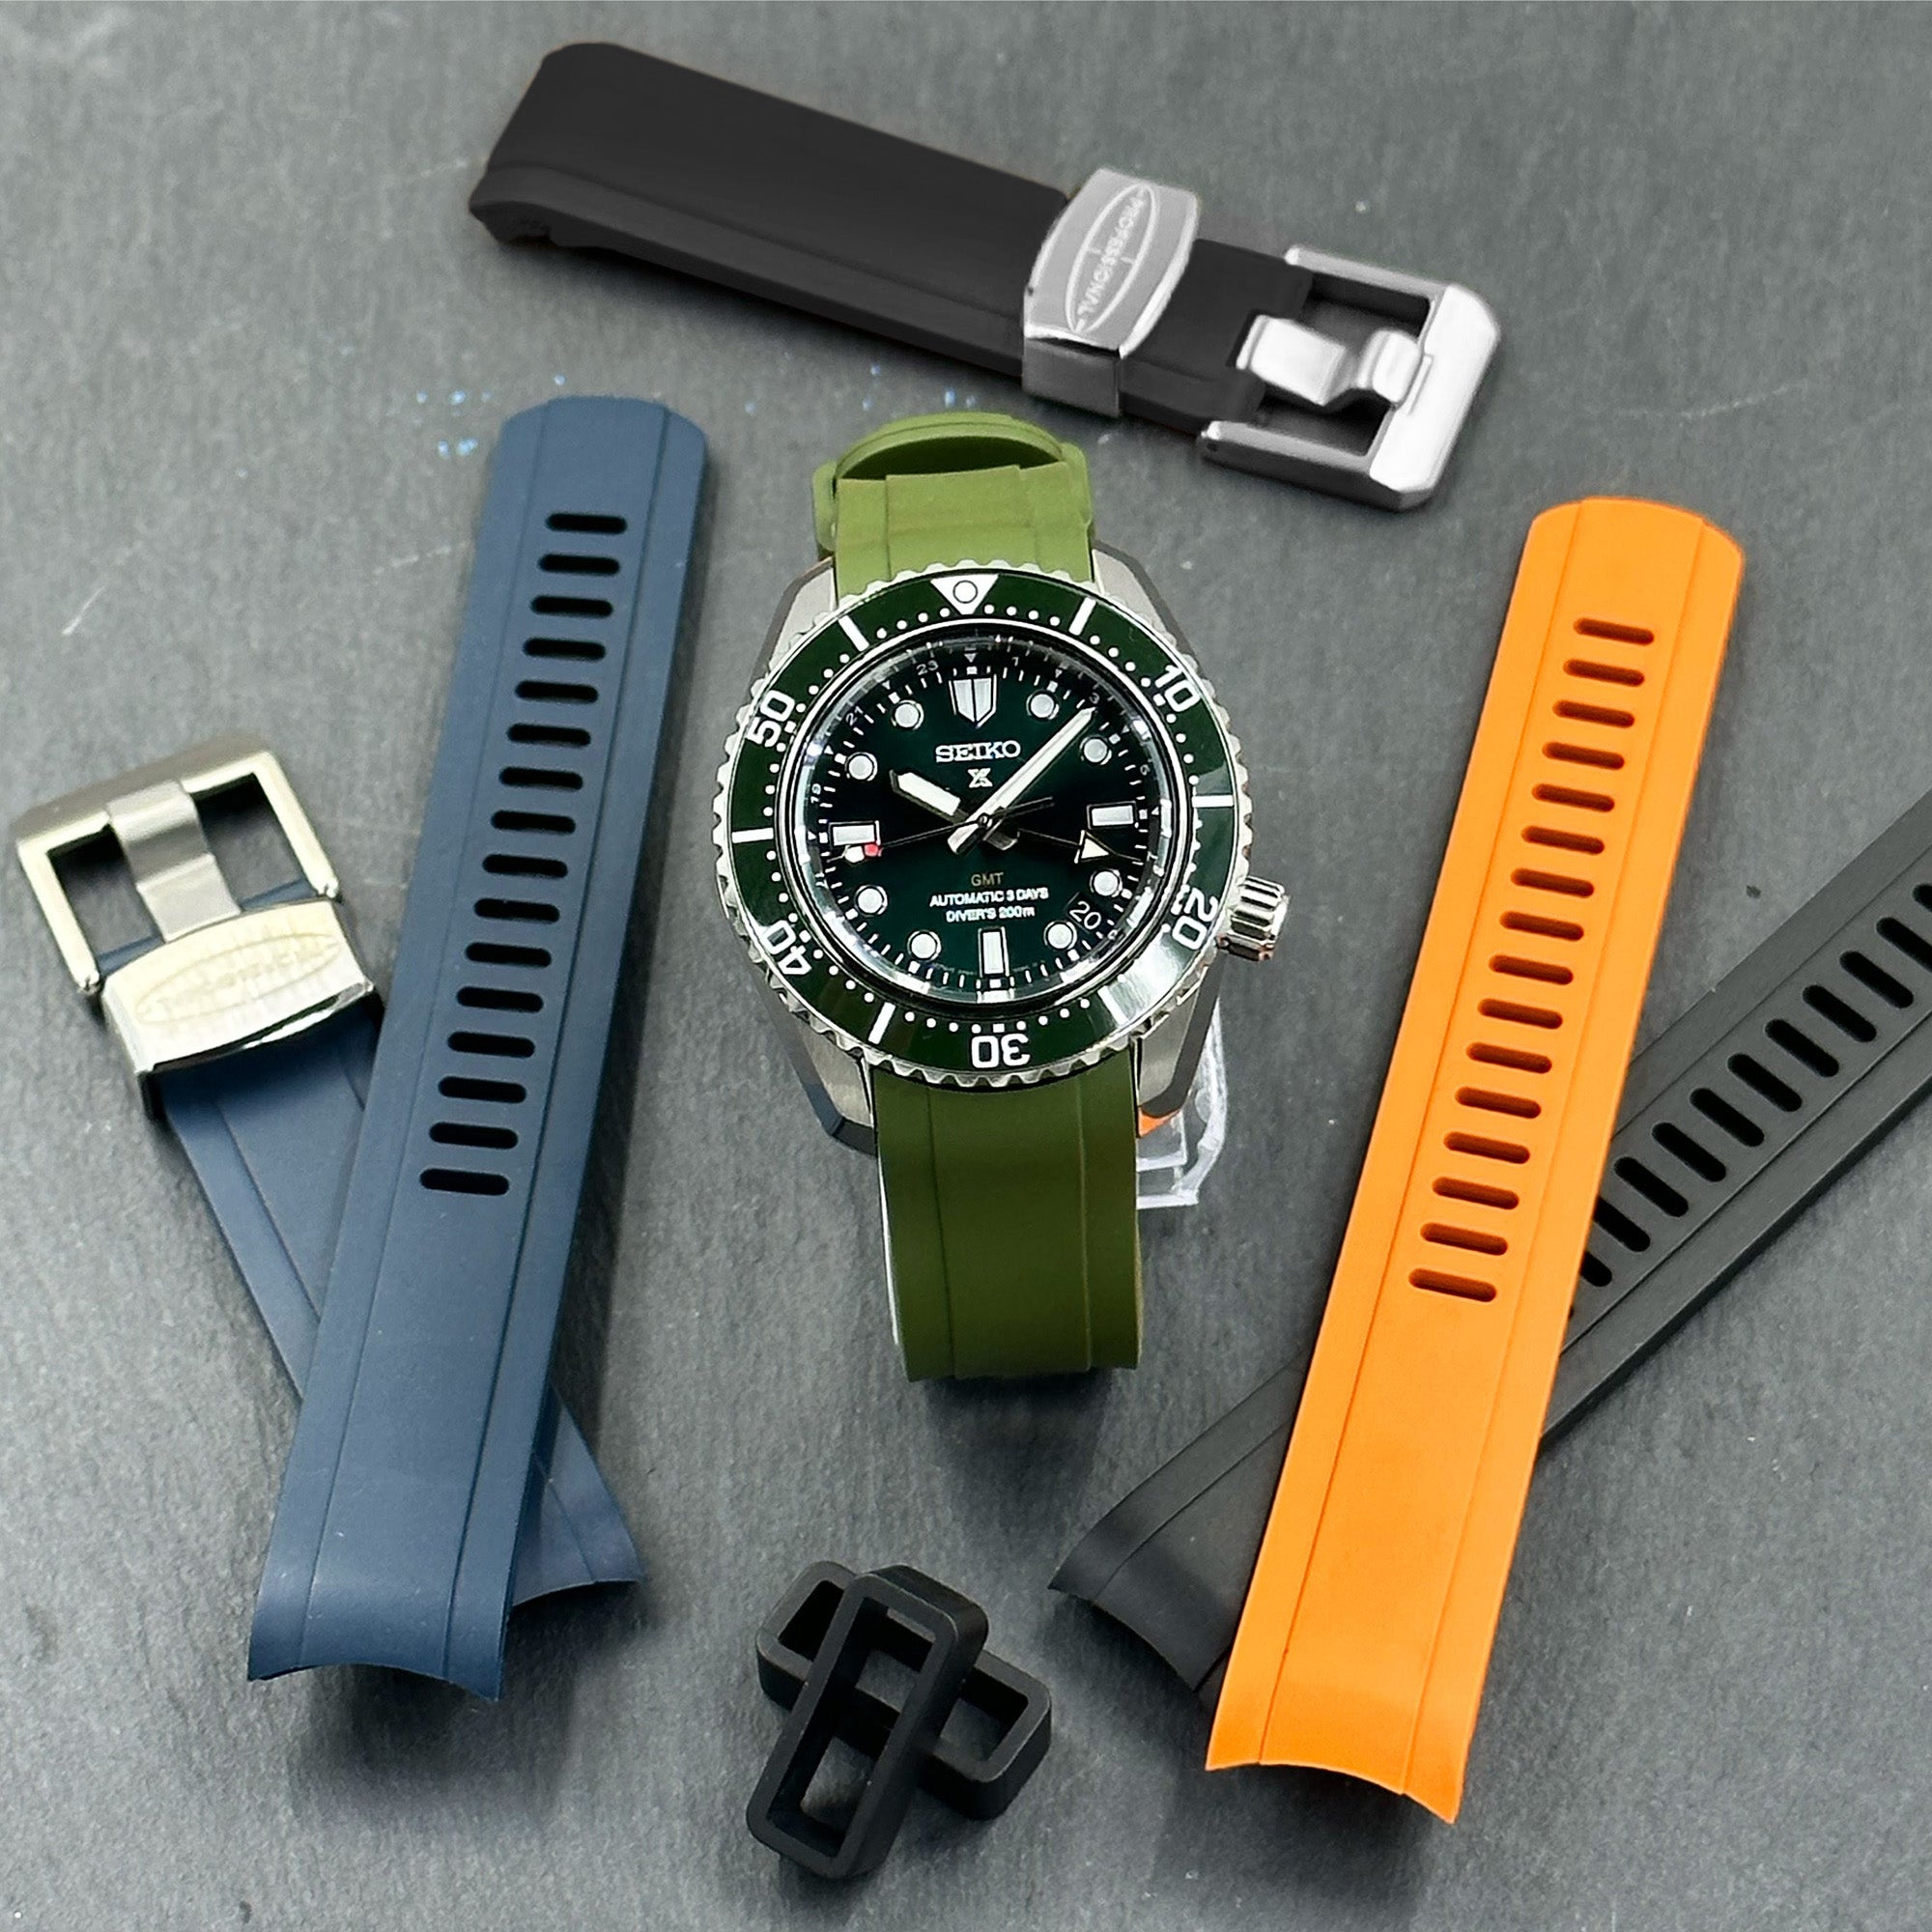  MiLTAT 20mm Watch Band for Seiko Mini Turtle SRPC35